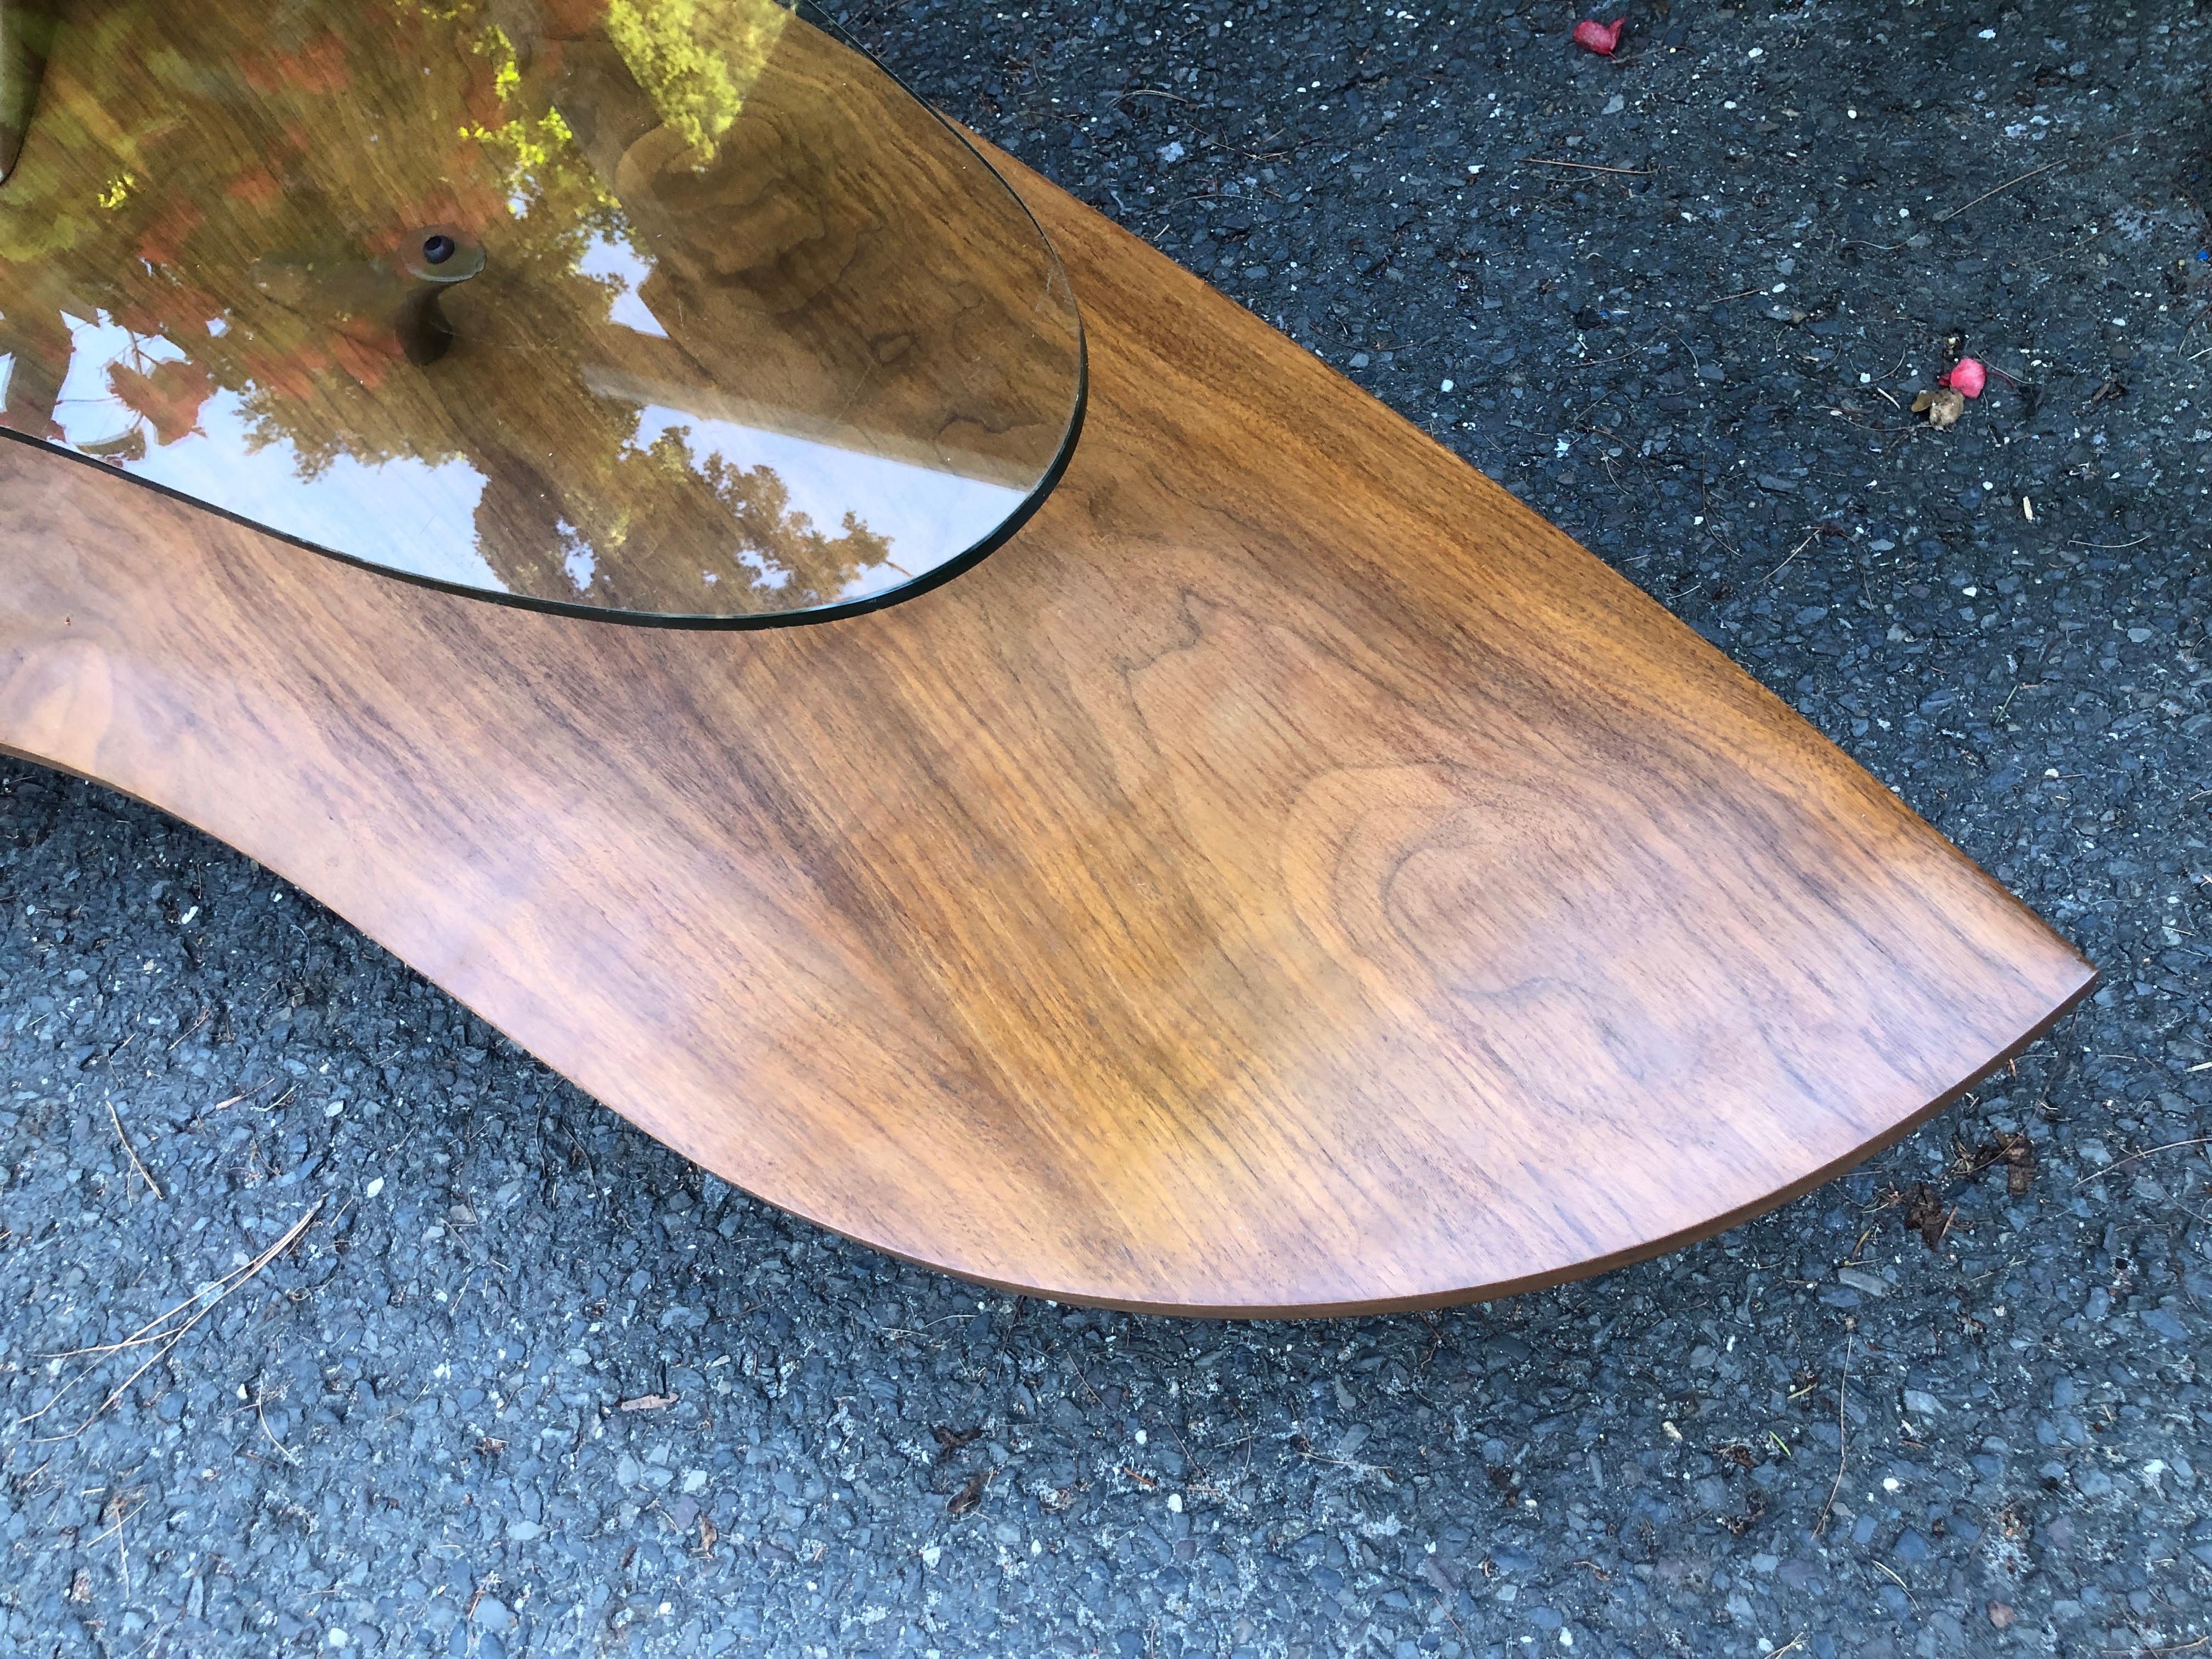 American Scrumptious Pearsall style Sculptural Walnut 2 Tier Coffee Table Kidney Shaped For Sale